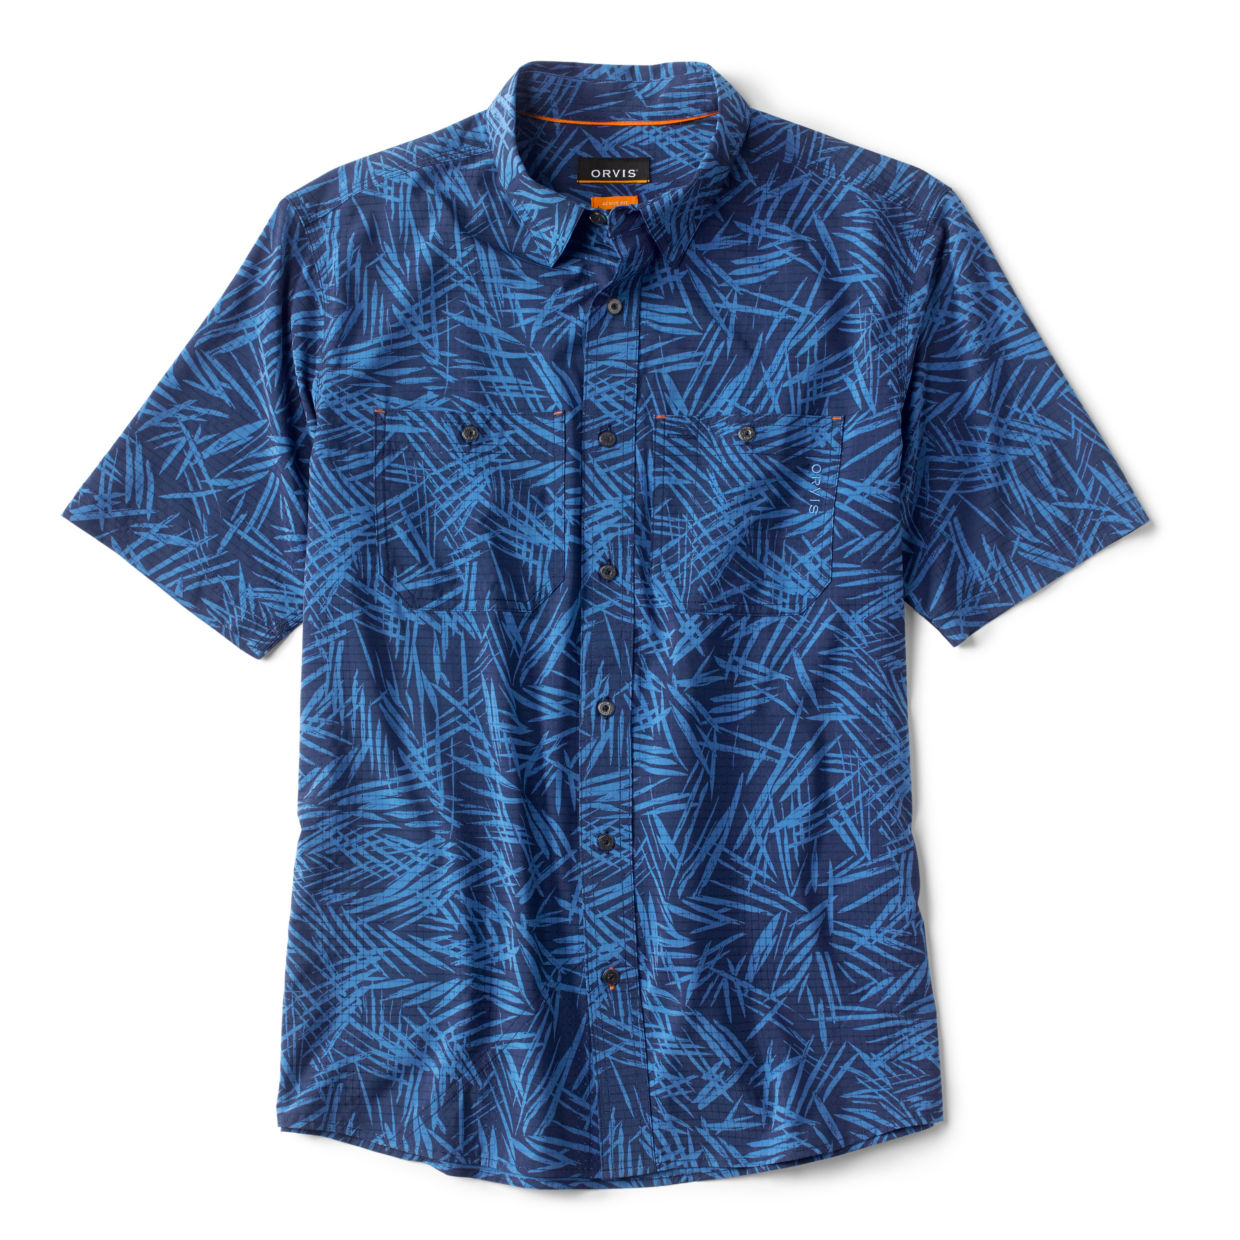 Men's Tropic Tech Printed Short-Sleeved Shirt Blue Size Large Polyester/Recycled Materials Orvis